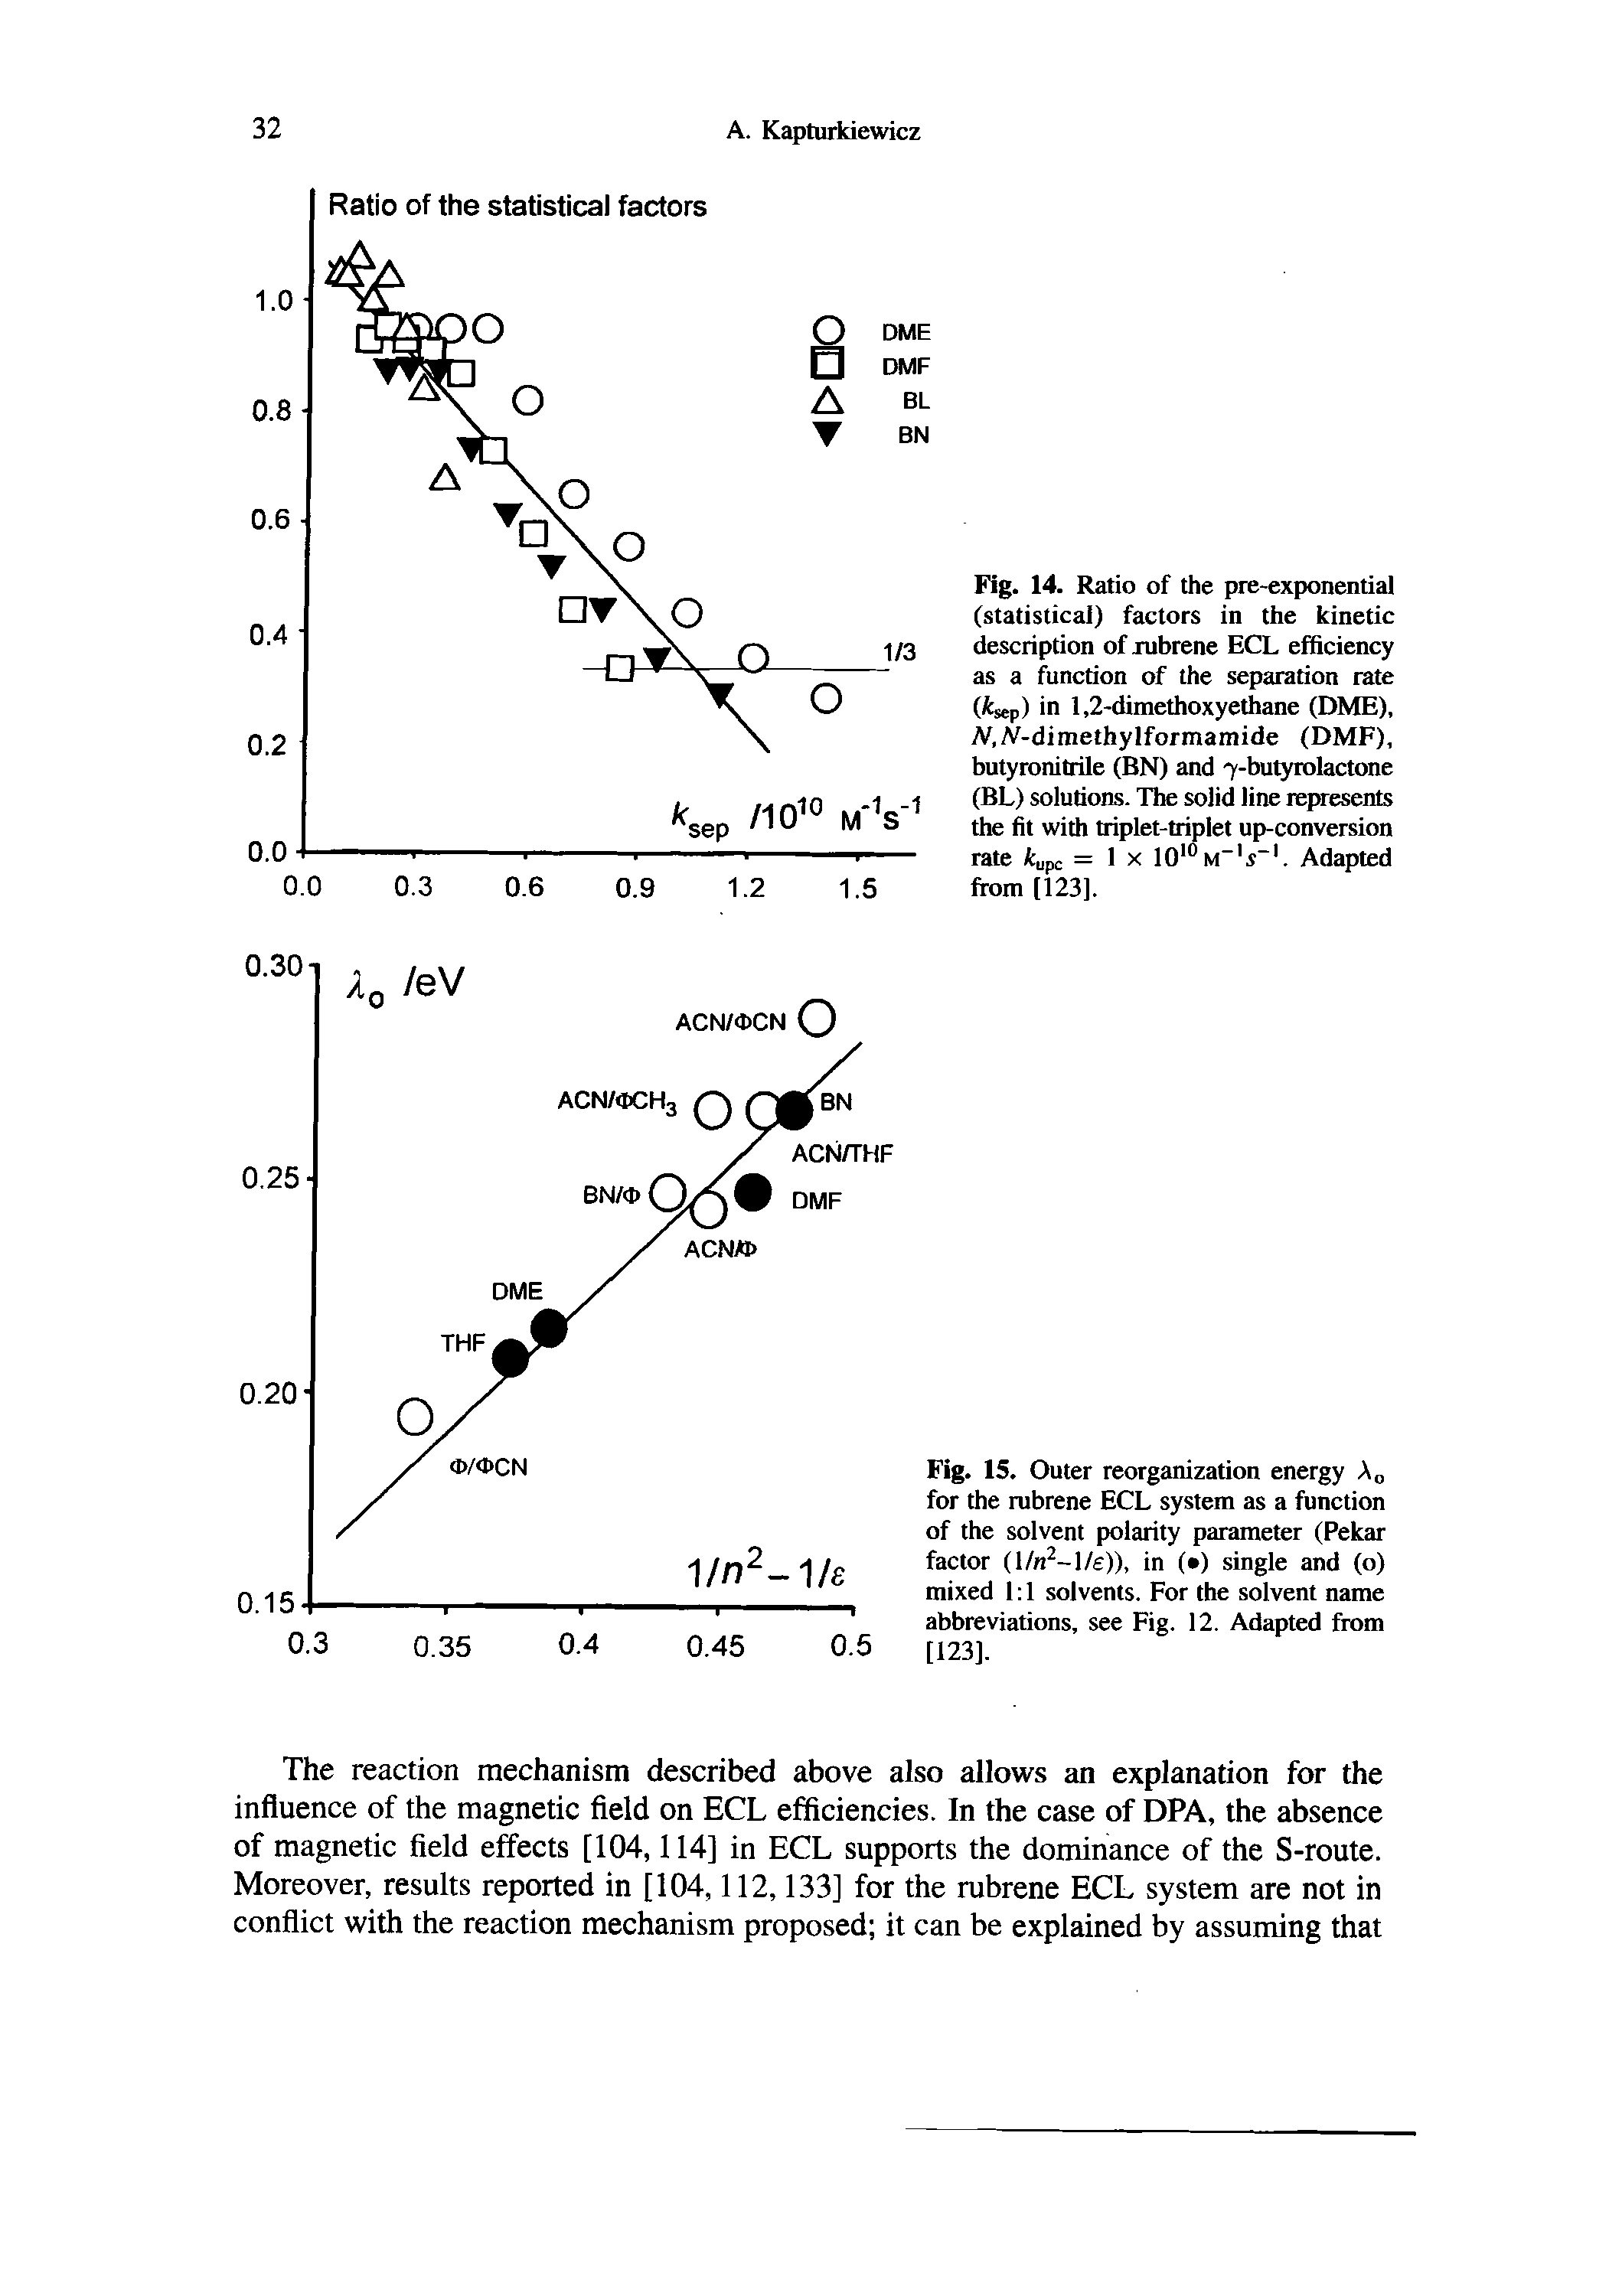 Fig. 14. Ratio of the pre-exponential (statistical) factors in the kinetic description of jubrene ECL efficiency as a function of the separation rate (kscp) in 1,2-dimethoxyethane (DME), M -dimethylformamide (DMF), butyronitrile (BN) and 7-butytolactone (BL) solutions. The solid line represents the fit with triplet-triplet up-conversion rate kupc = 1 x 10 m" s . Adapted from [123].